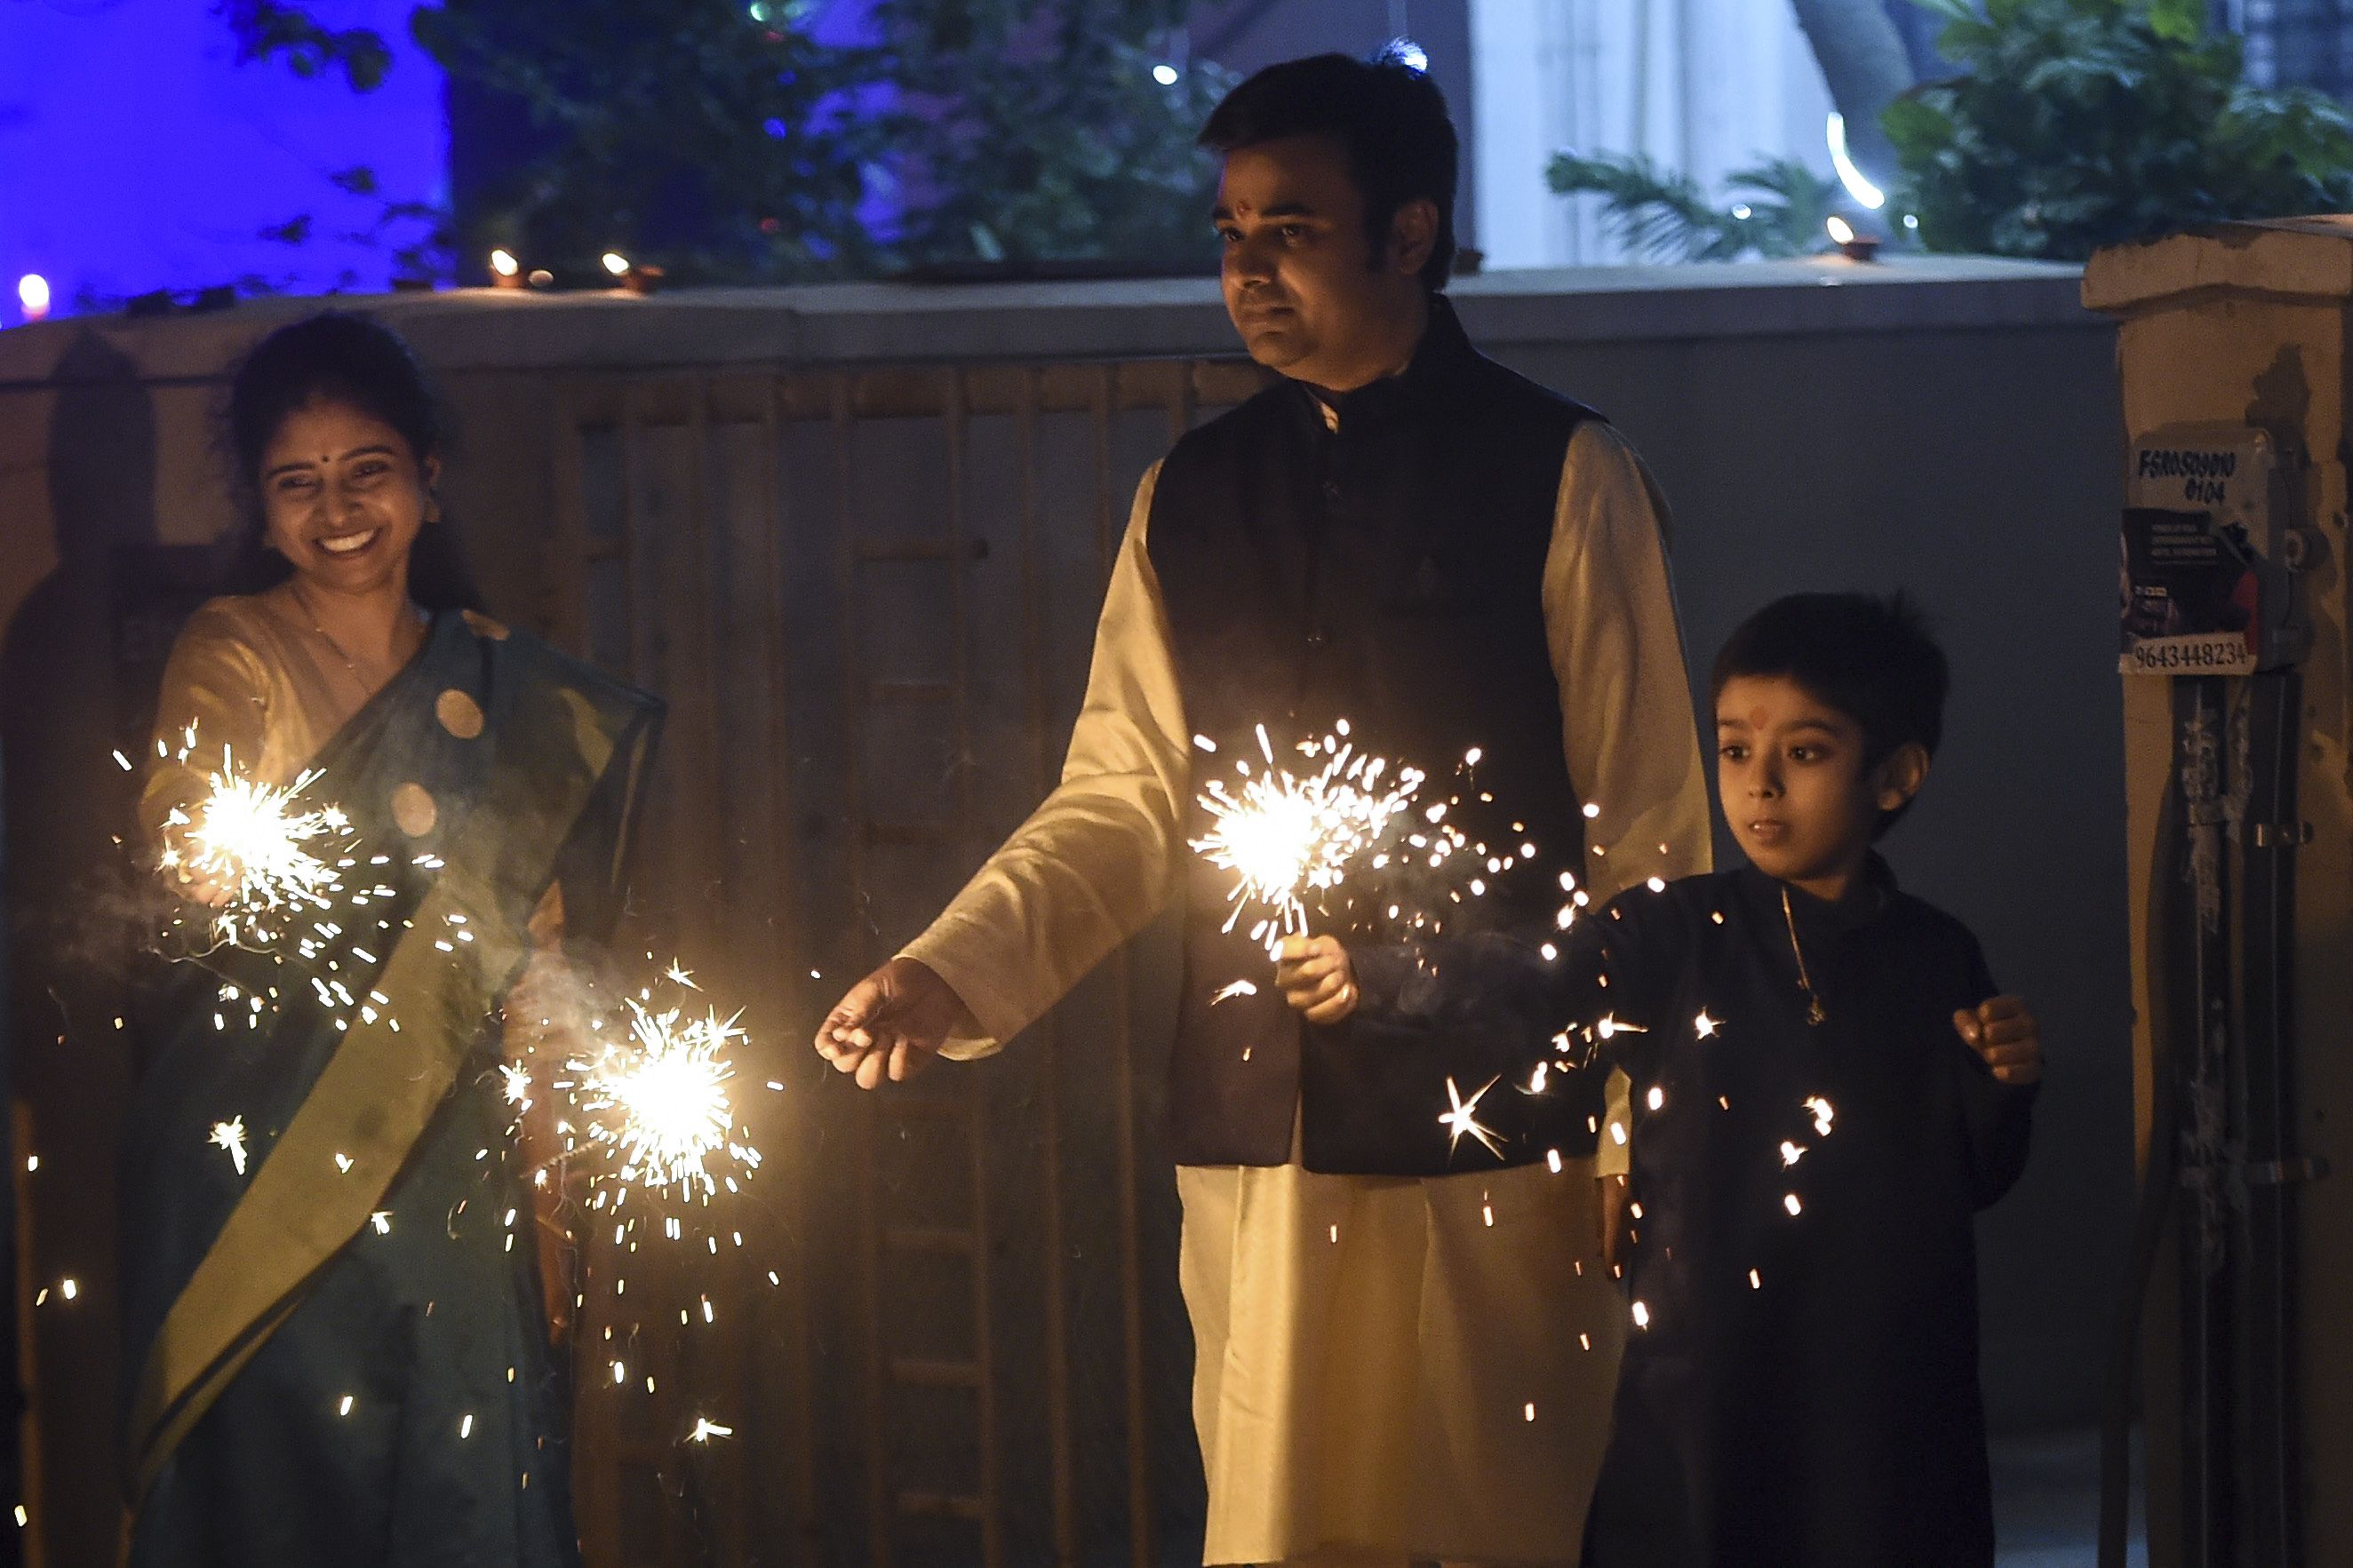 A family lights a sparkler during Diwali, the Hindu Festival of Lights, in Faridabad on November 14, 2020. (Photo by Money SHARMA / AFP) (Photo by MONEY SHARMA/AFP via Getty Images)